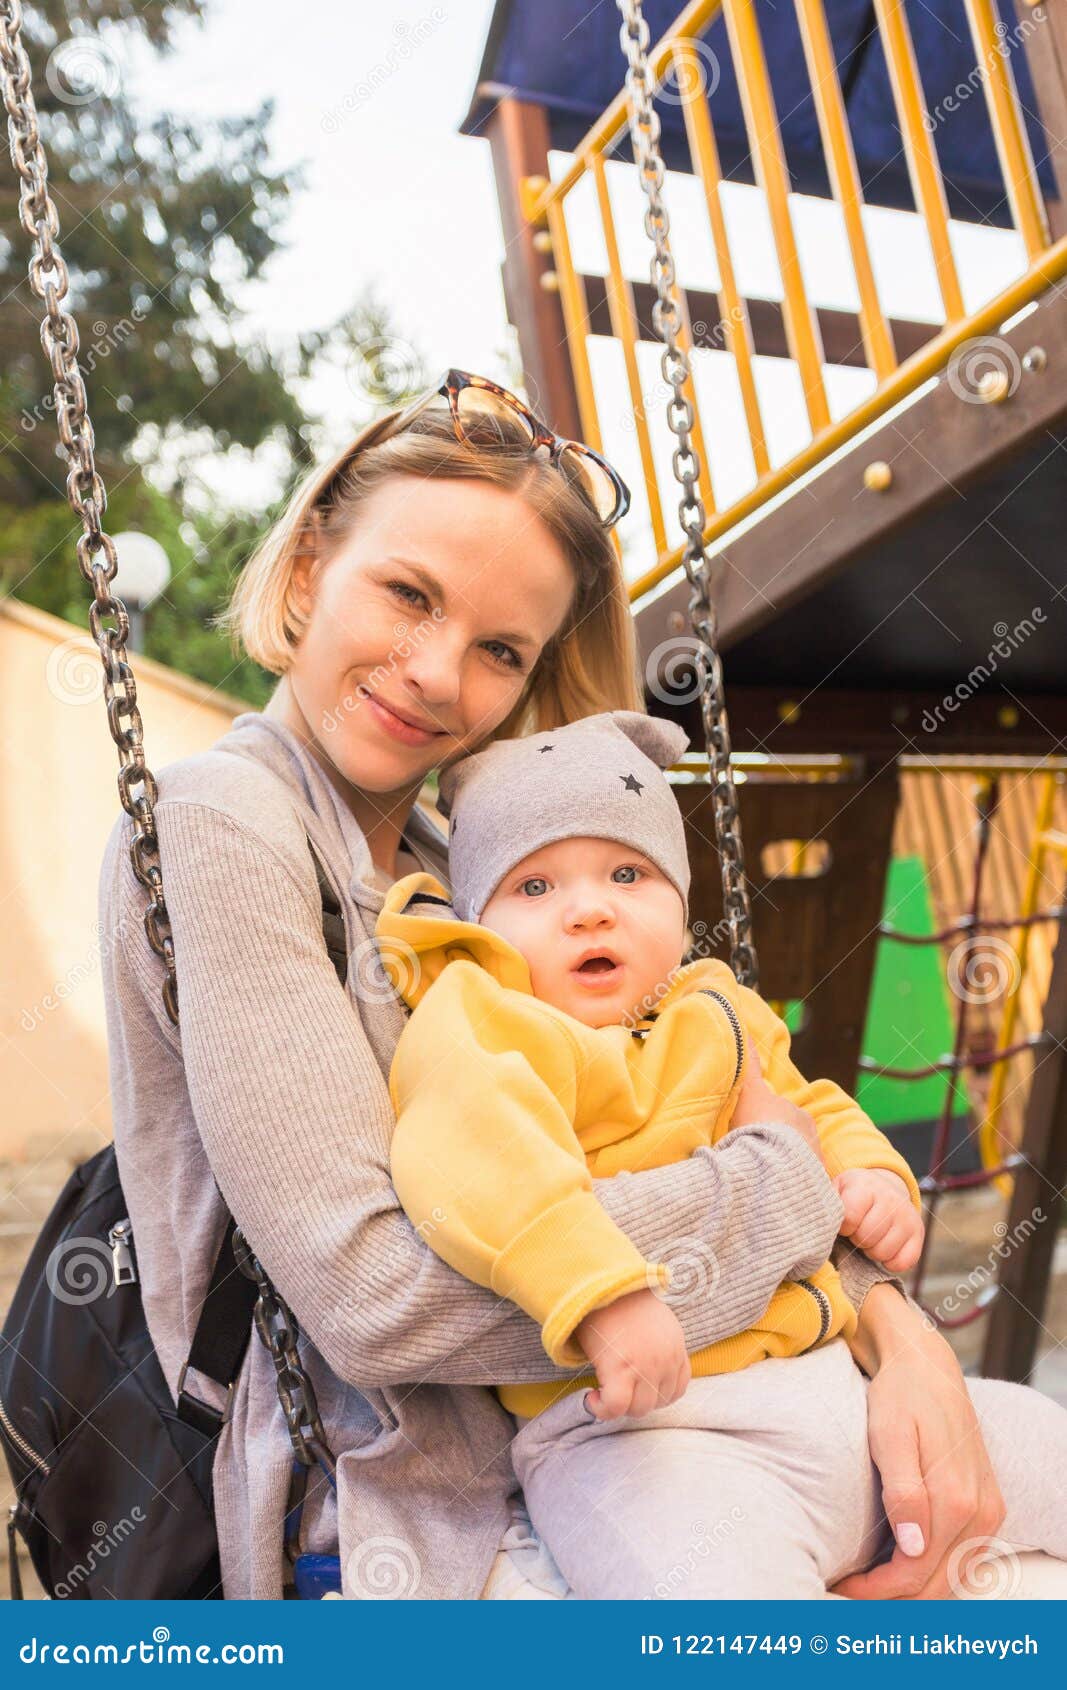 Mom and Son Ride on a Swing in the Playground Stock Image pic picture